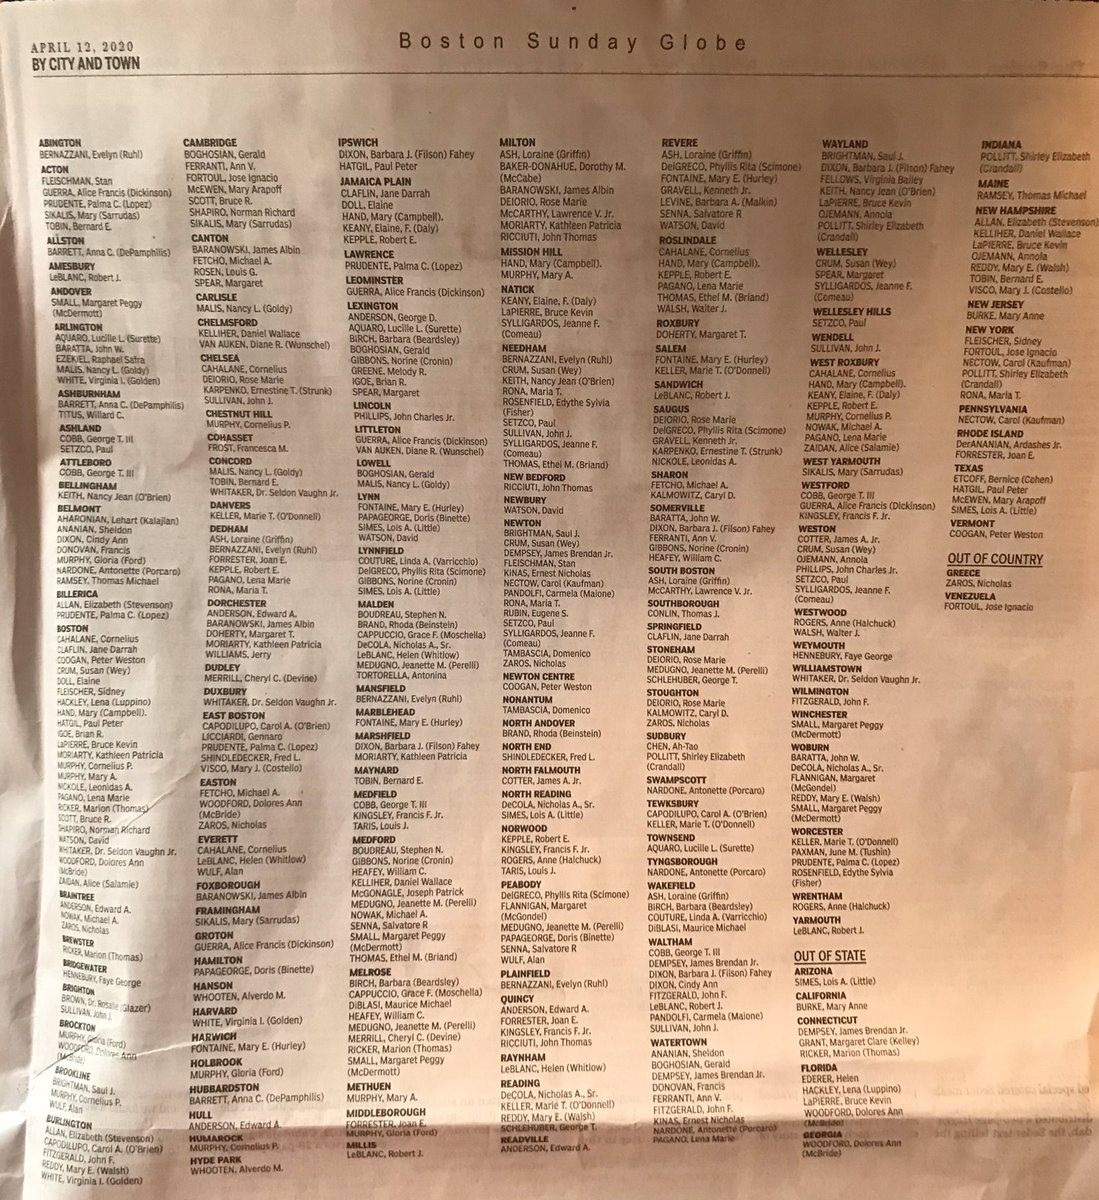 The notices in today's Sunday  @BostonGlobe represent 127 cities and towns across all of  #Massachusetts, mostly Eastern Mass. It also includes notices from 14 other states (33 total) and 2 notices from outside of US (Greece and Venezuela) of lost lives with connections to Mass.